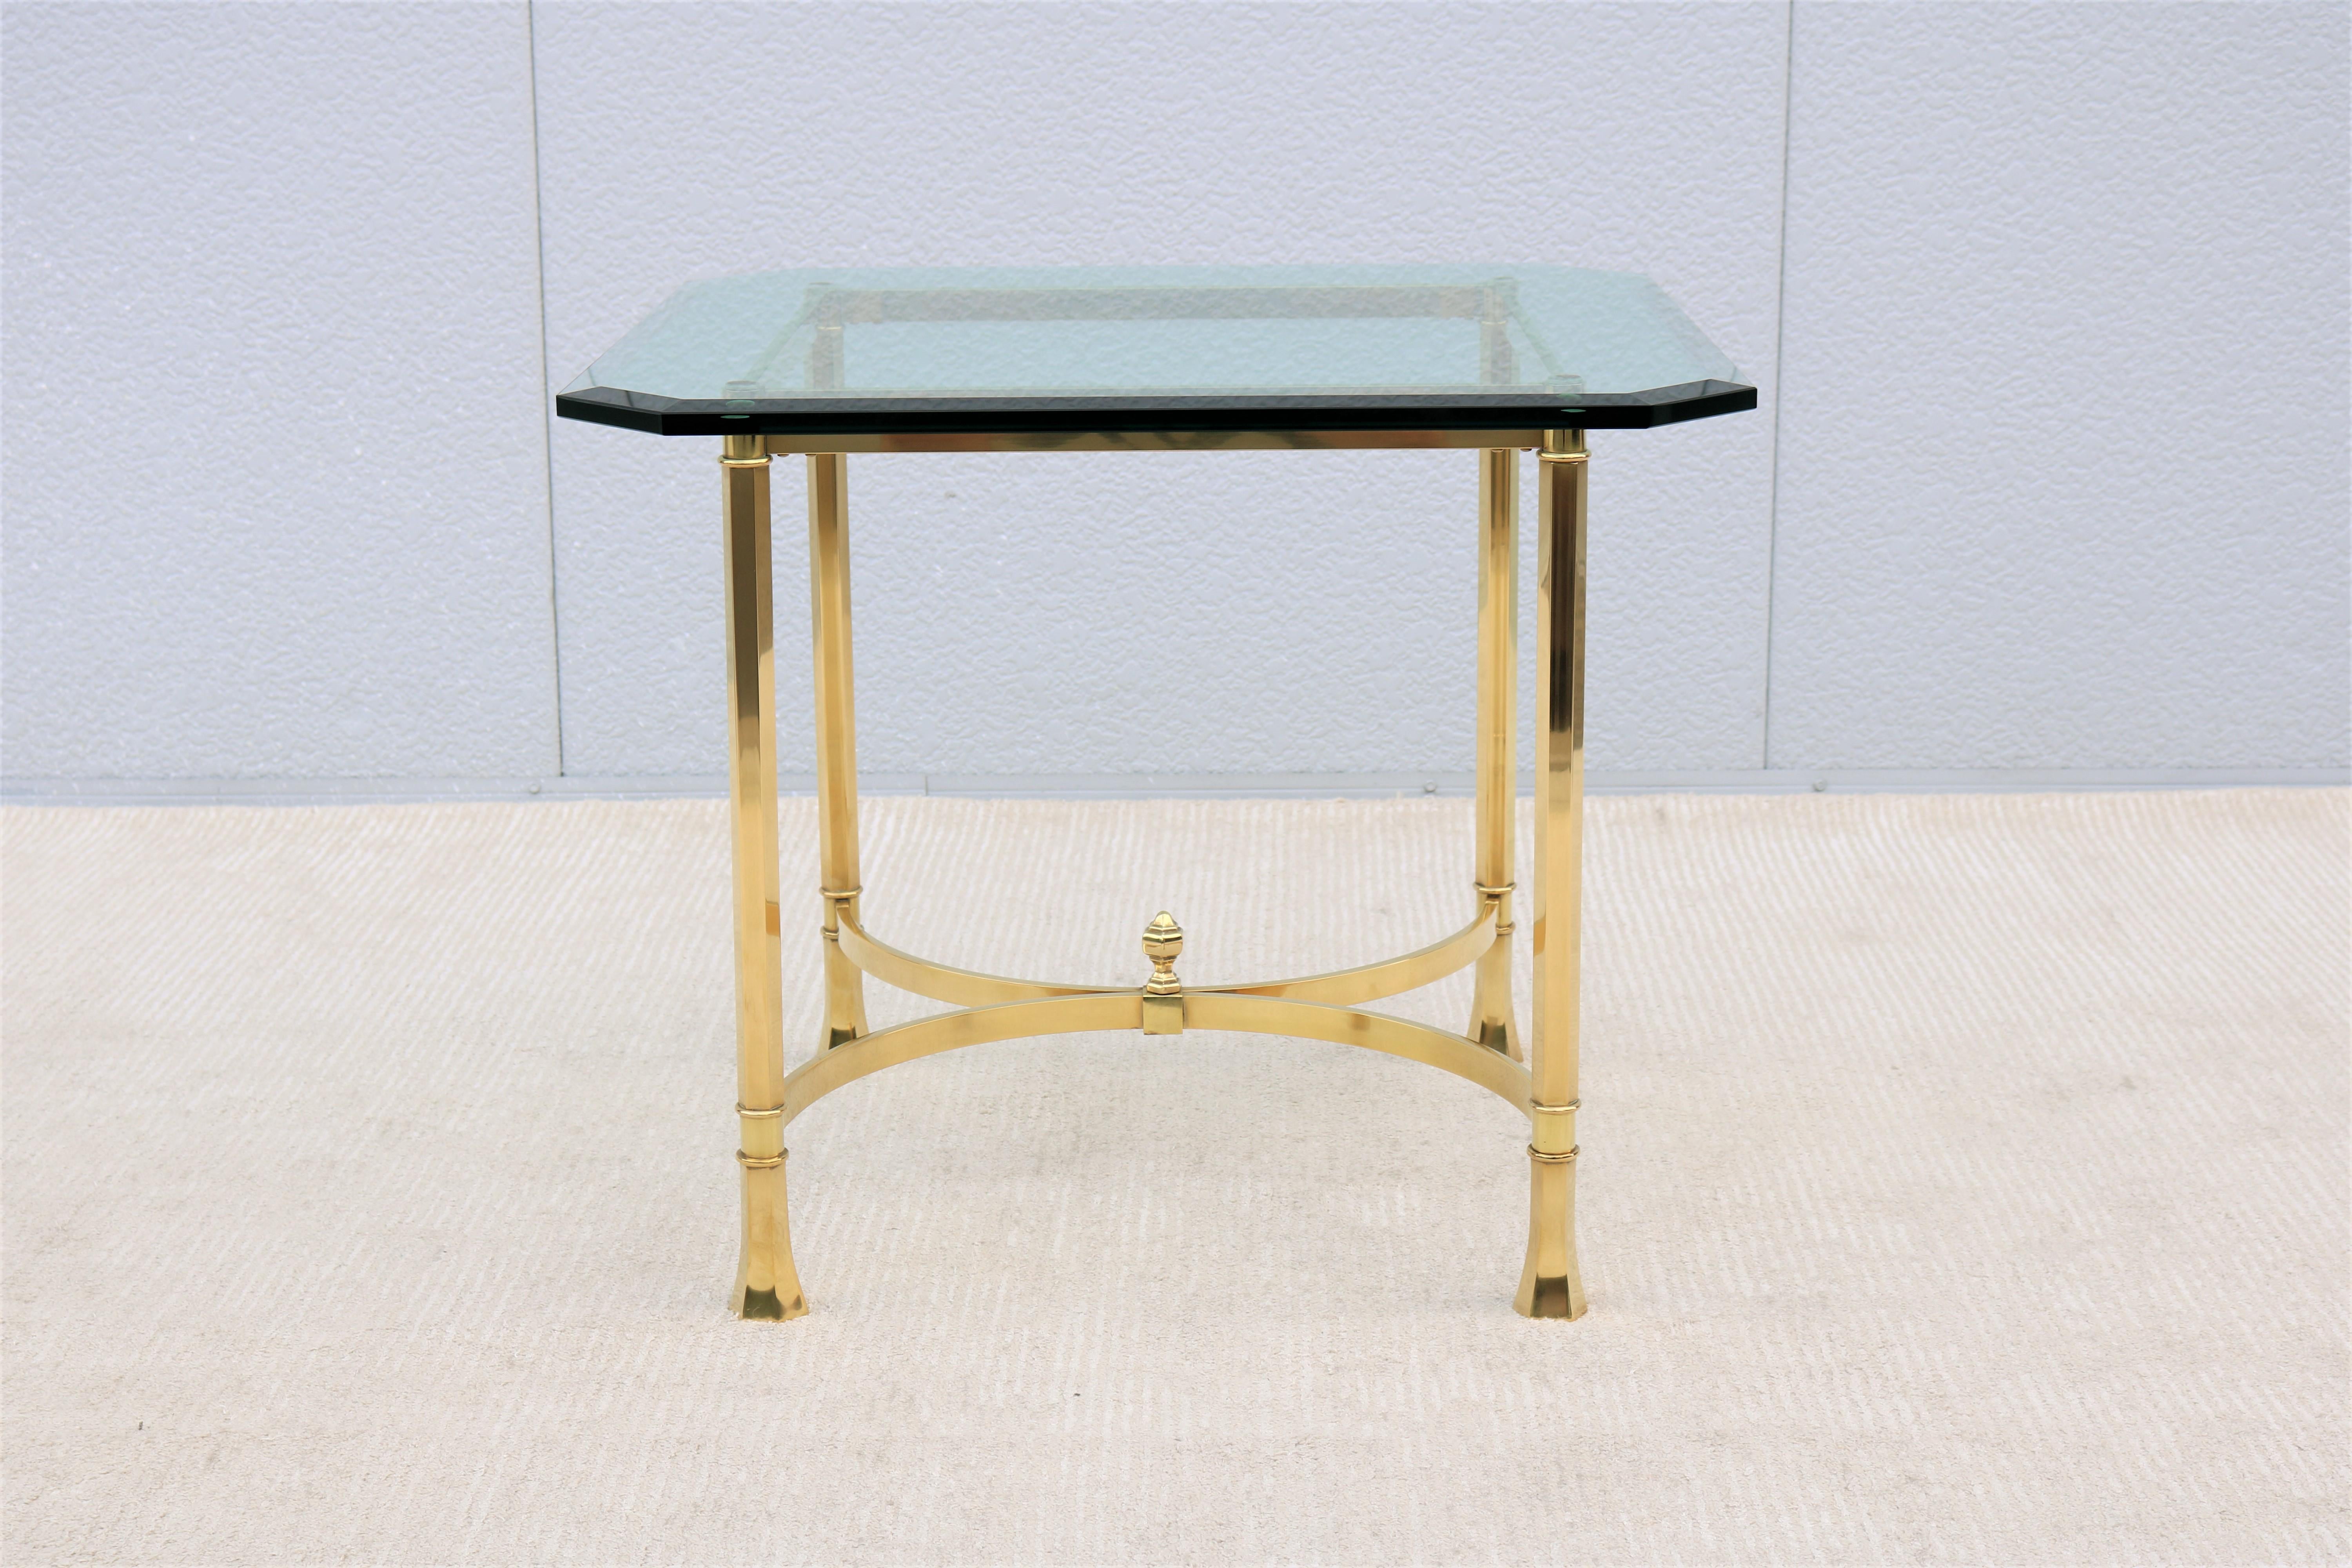 1970s Mid-Century Italian Maison Bagues Style Brass and Glass Square Side Table In Excellent Condition For Sale In Secaucus, NJ